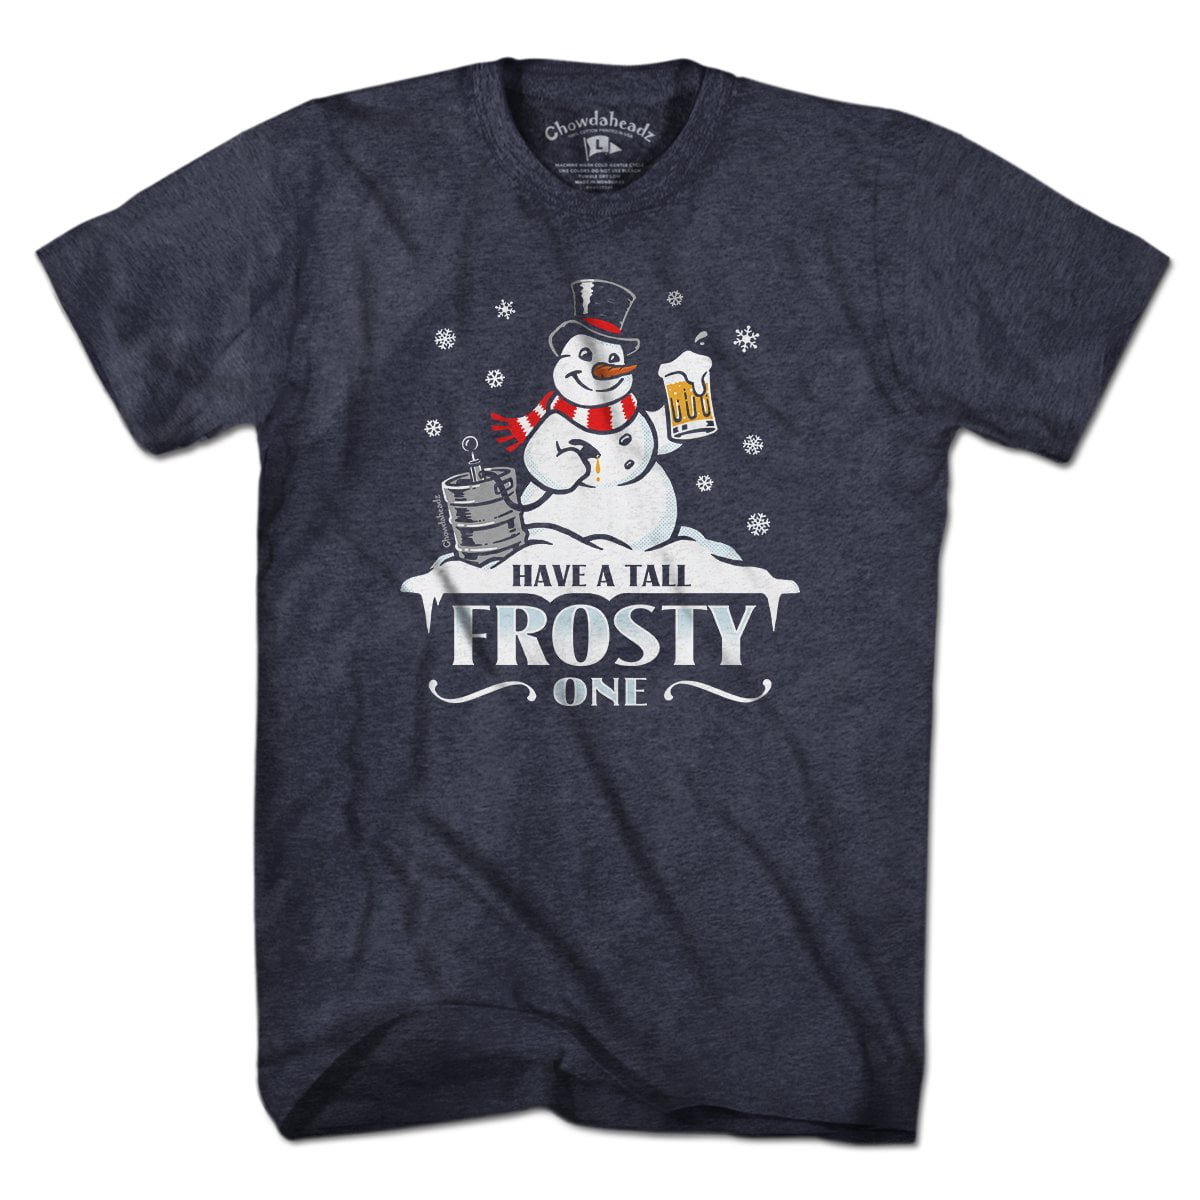 Have A Tall Frosty One T-Shirt - Chowdaheadz